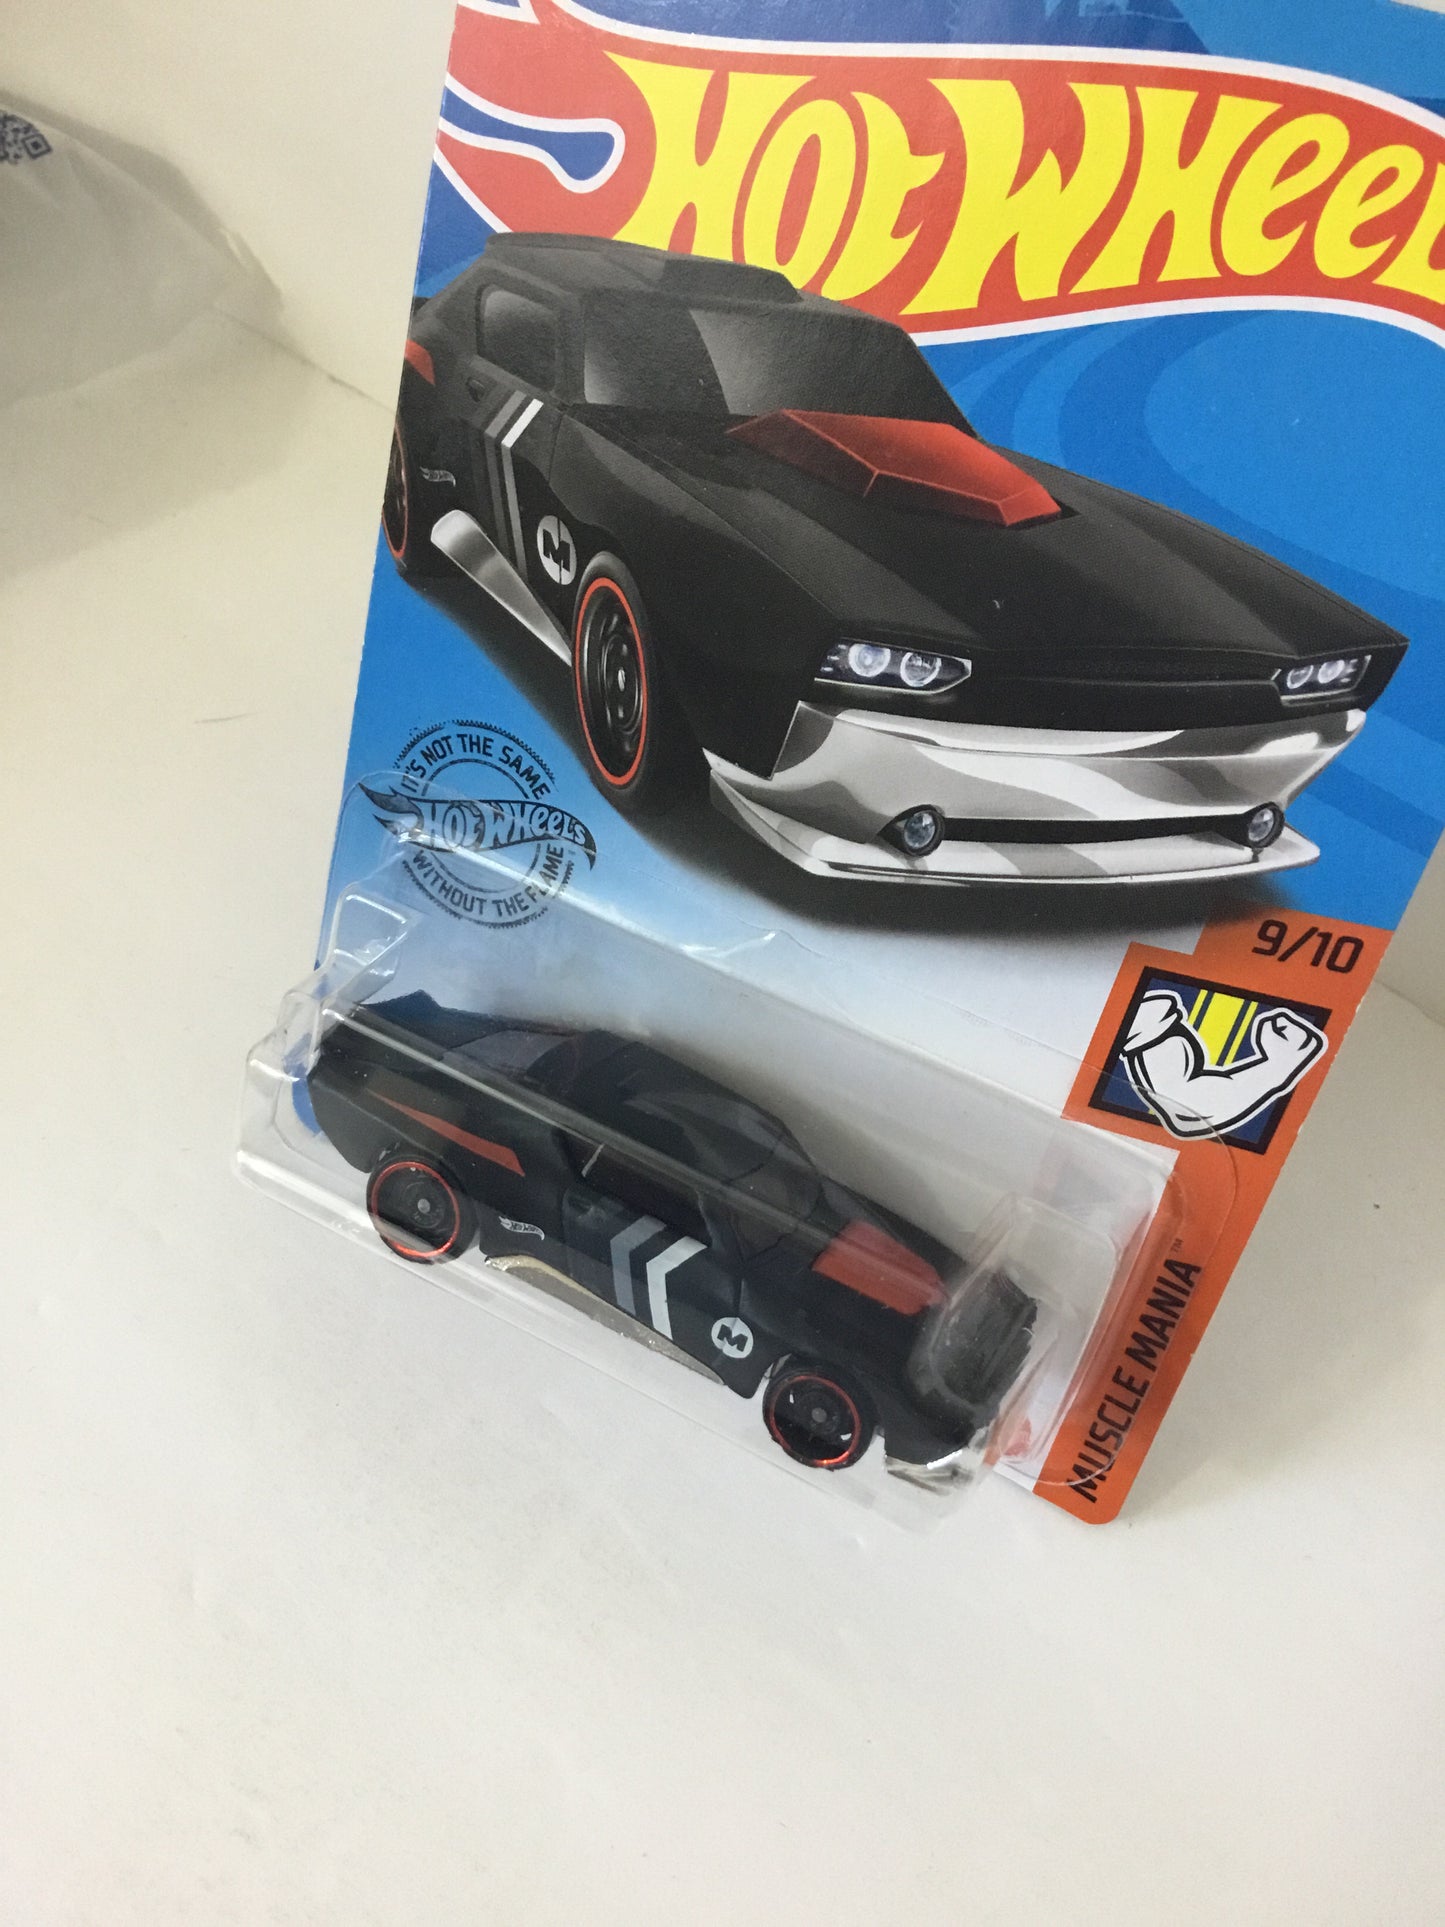 2020 hot wheels P case #244 Muscle Bound RR7